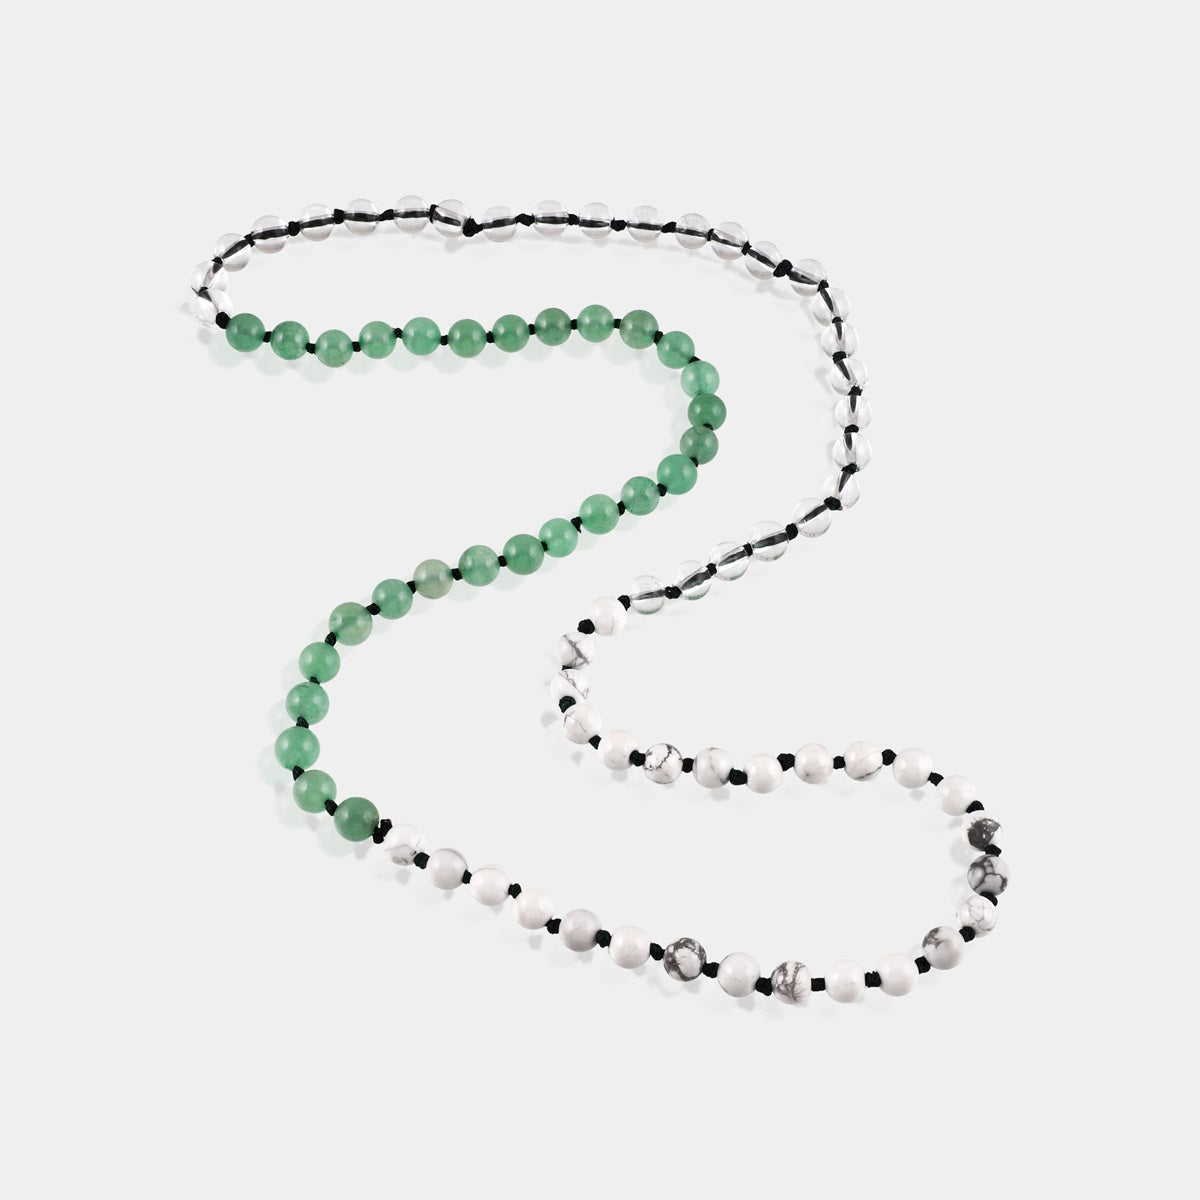 Vibrant 6 mm smooth round Green Aventurine beads, symbolizing luck and emotional tranquility